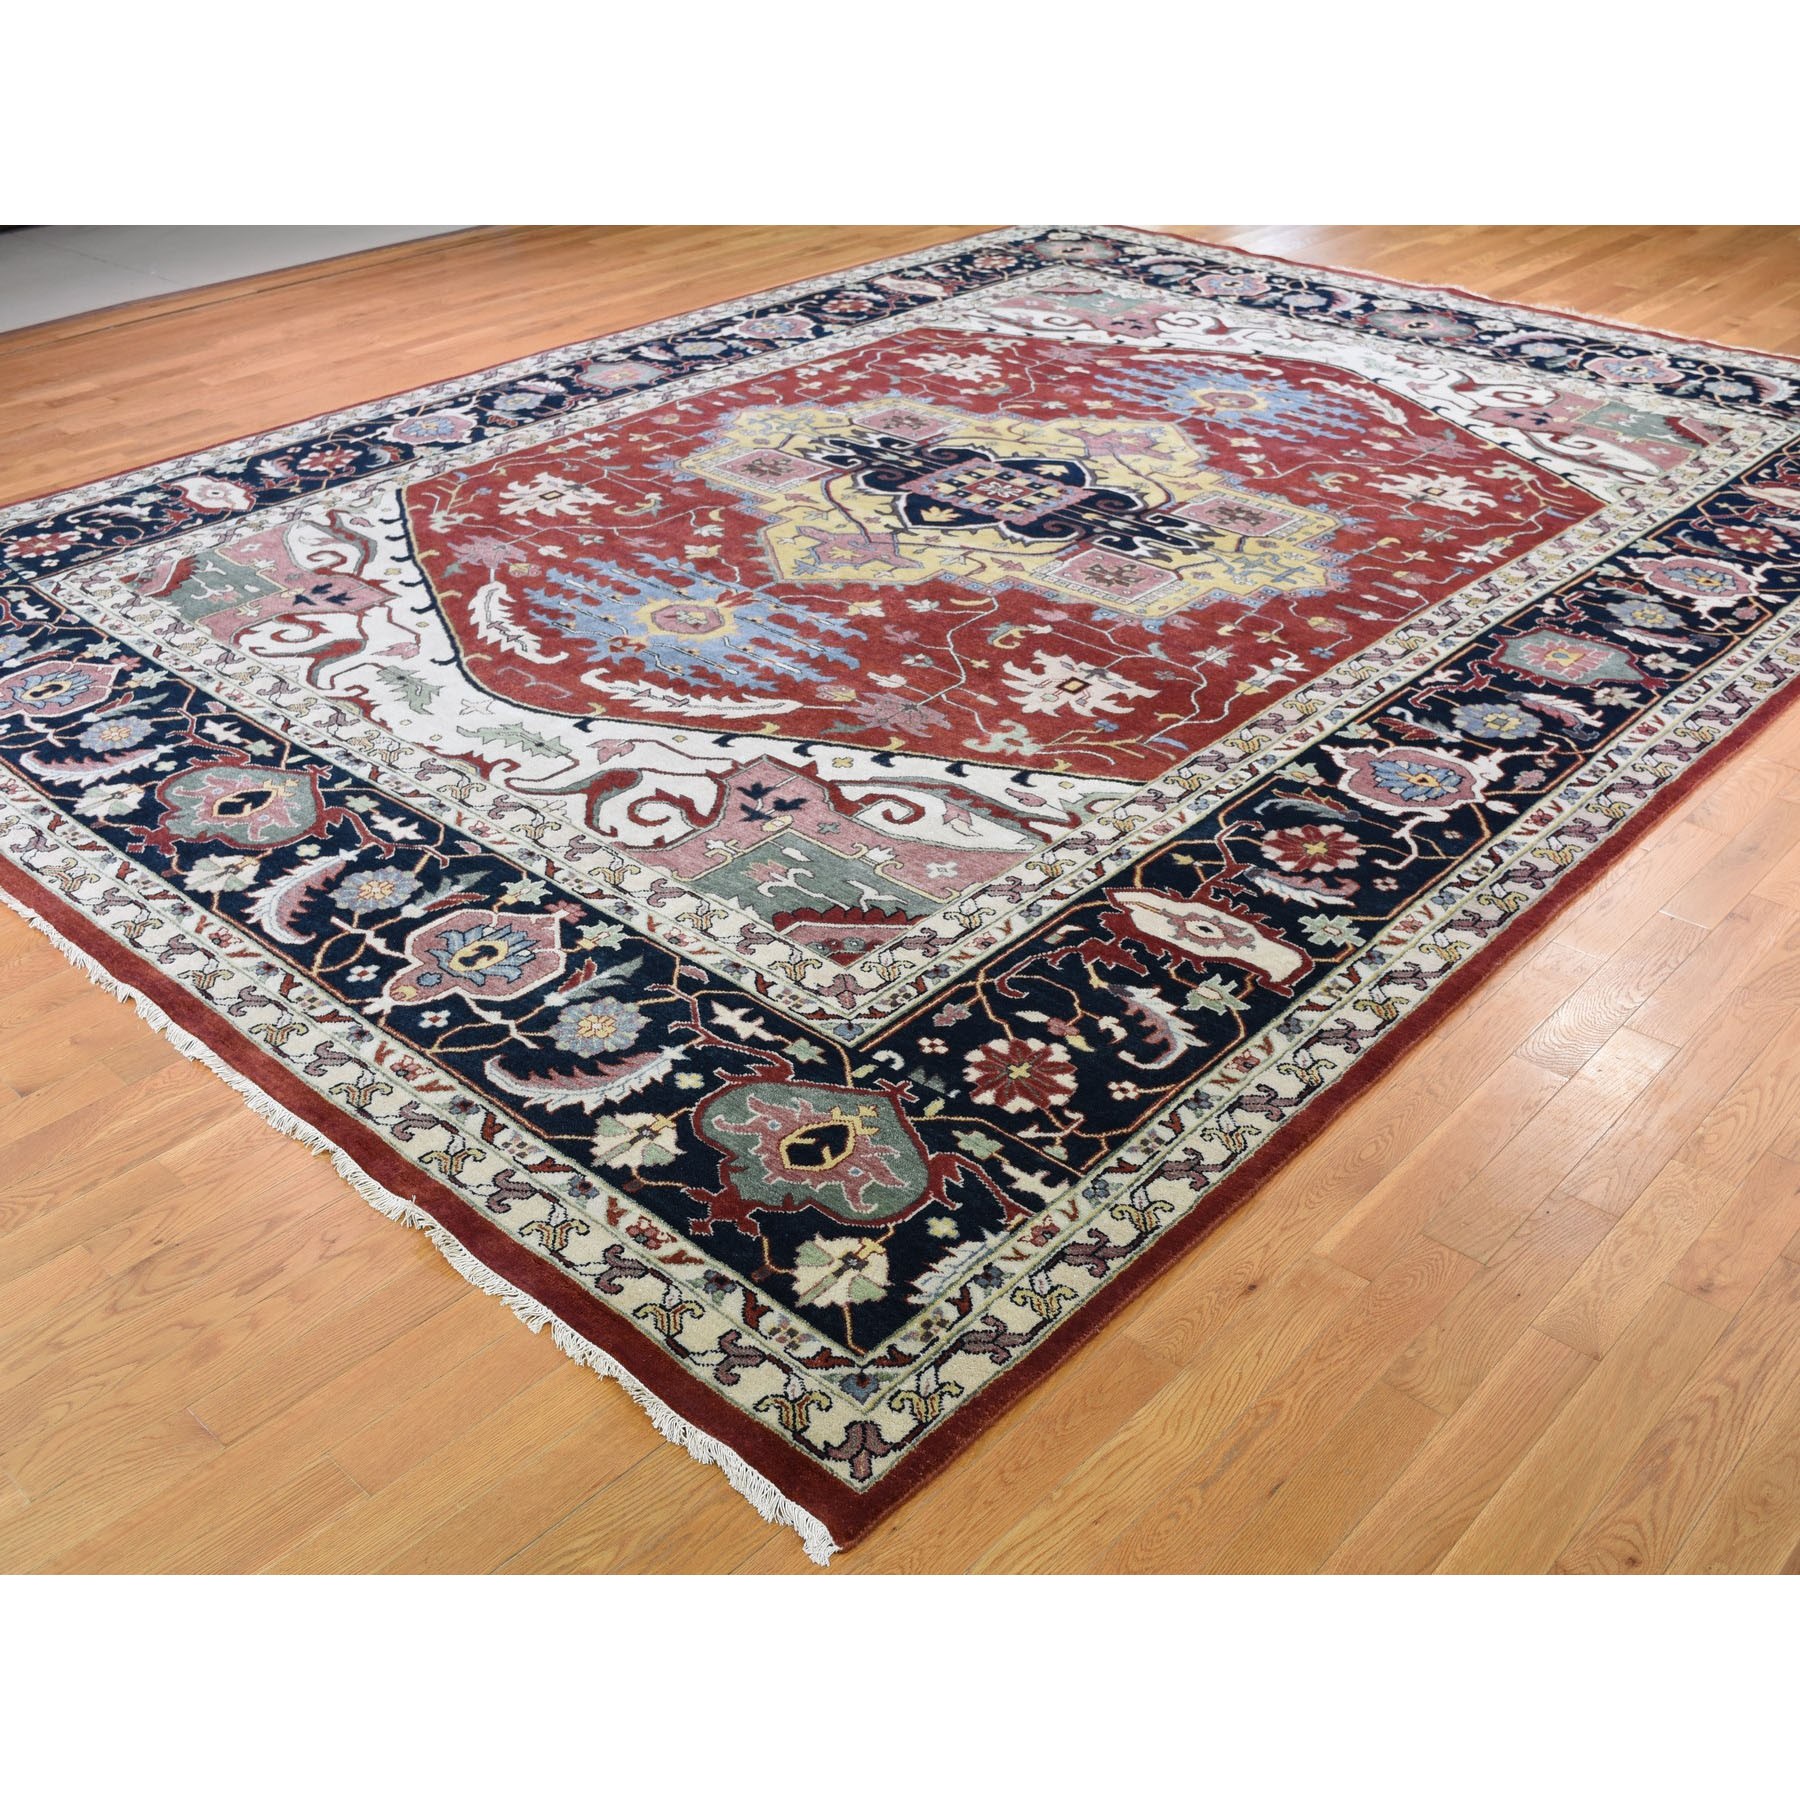 11'7"x15' Oversized Red Heriz Revival Pure Wool Hand Woven Oriental Rug 